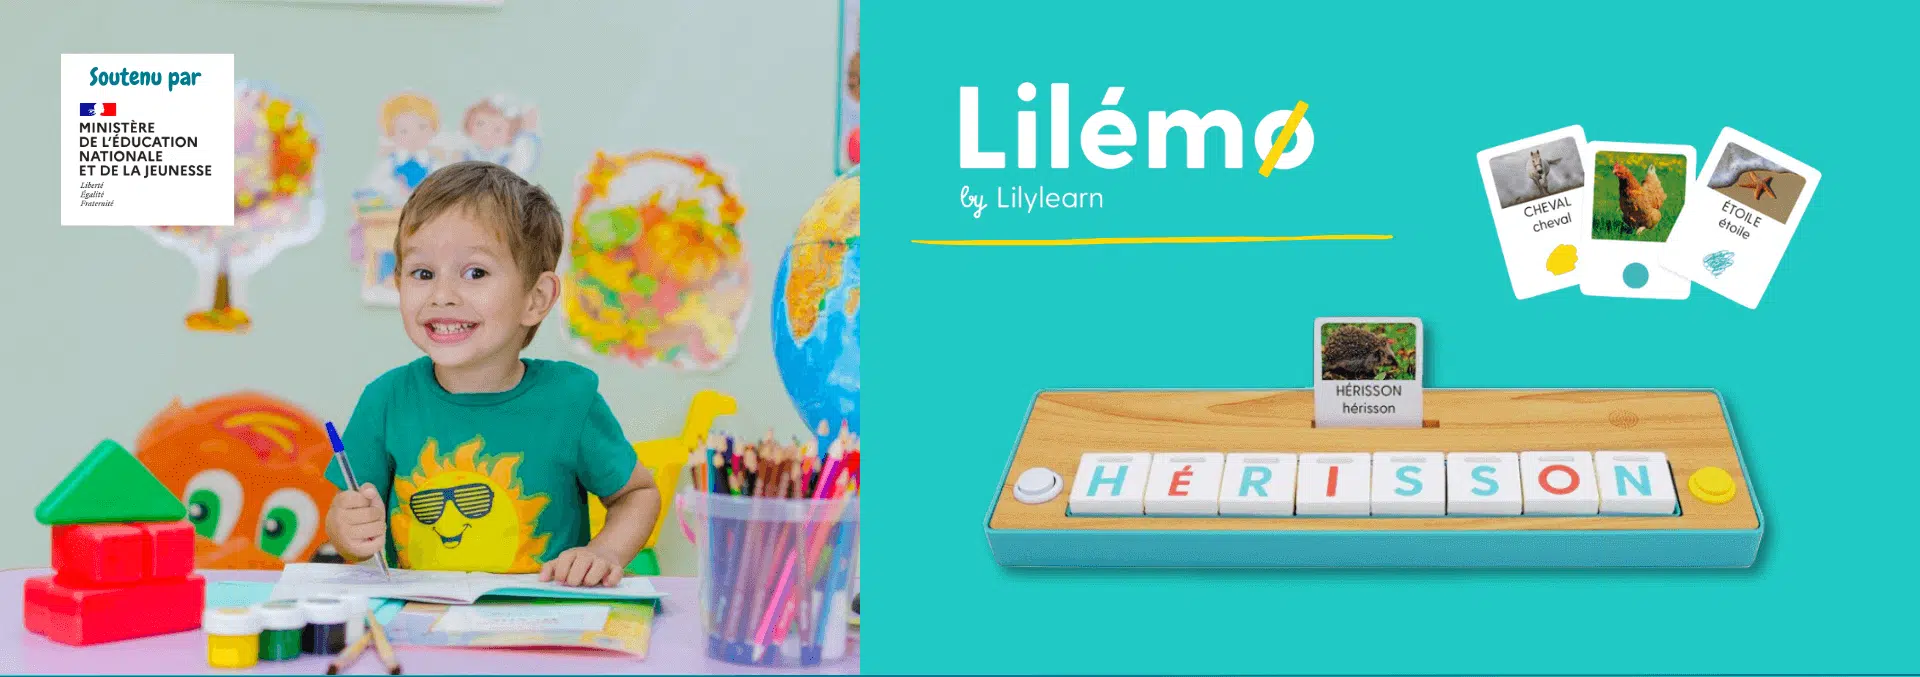 Child engaging in creative play with educational toys endorsed by the Education Ministry, featuring Lilémō by Lilylearn language learning game for children.